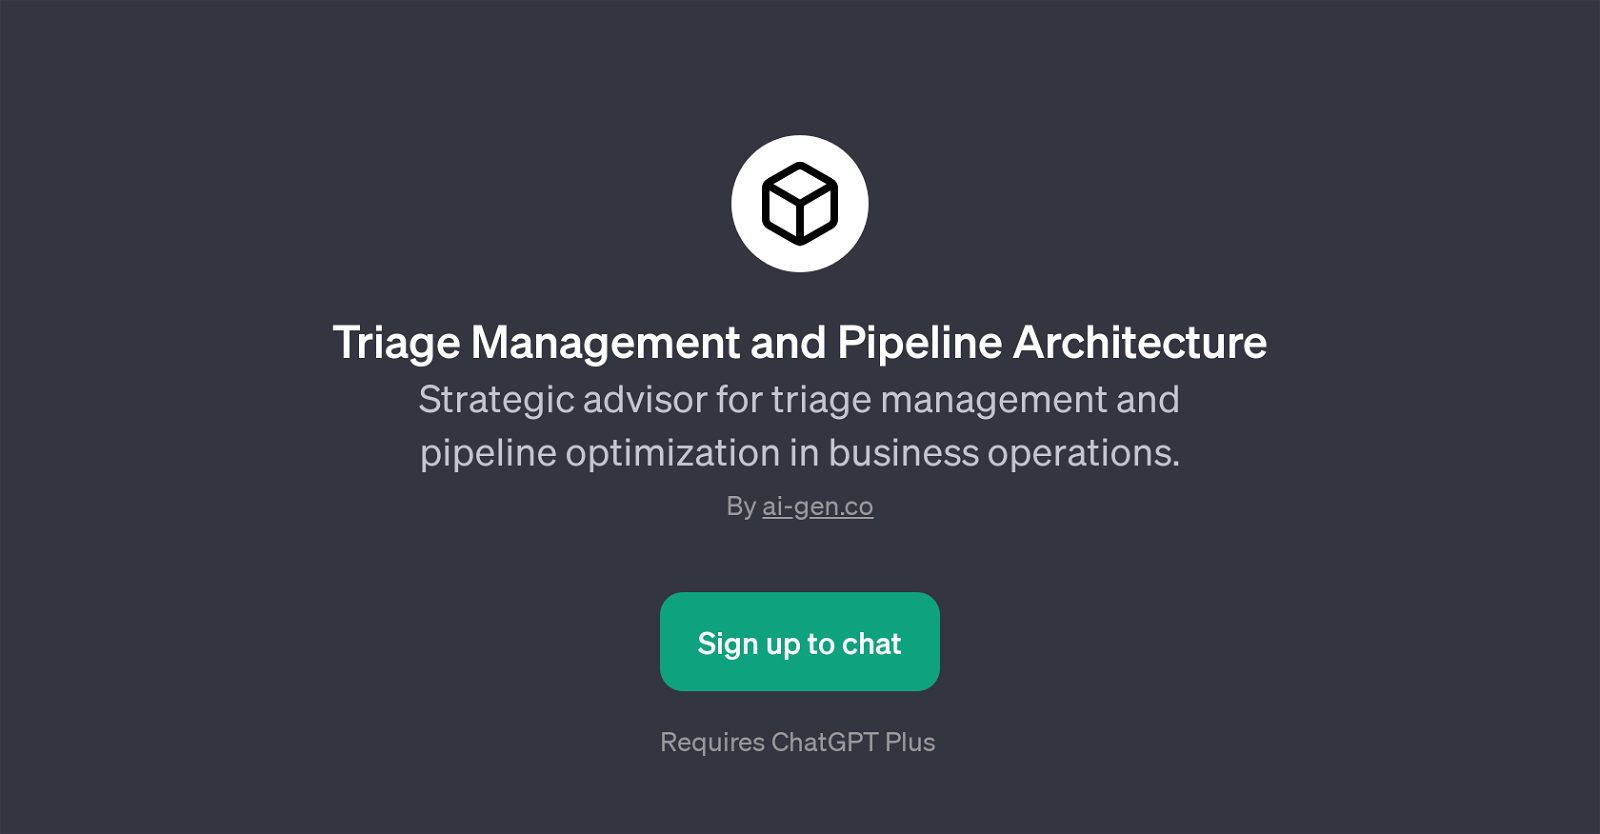 Triage Management and Pipeline Architecture website